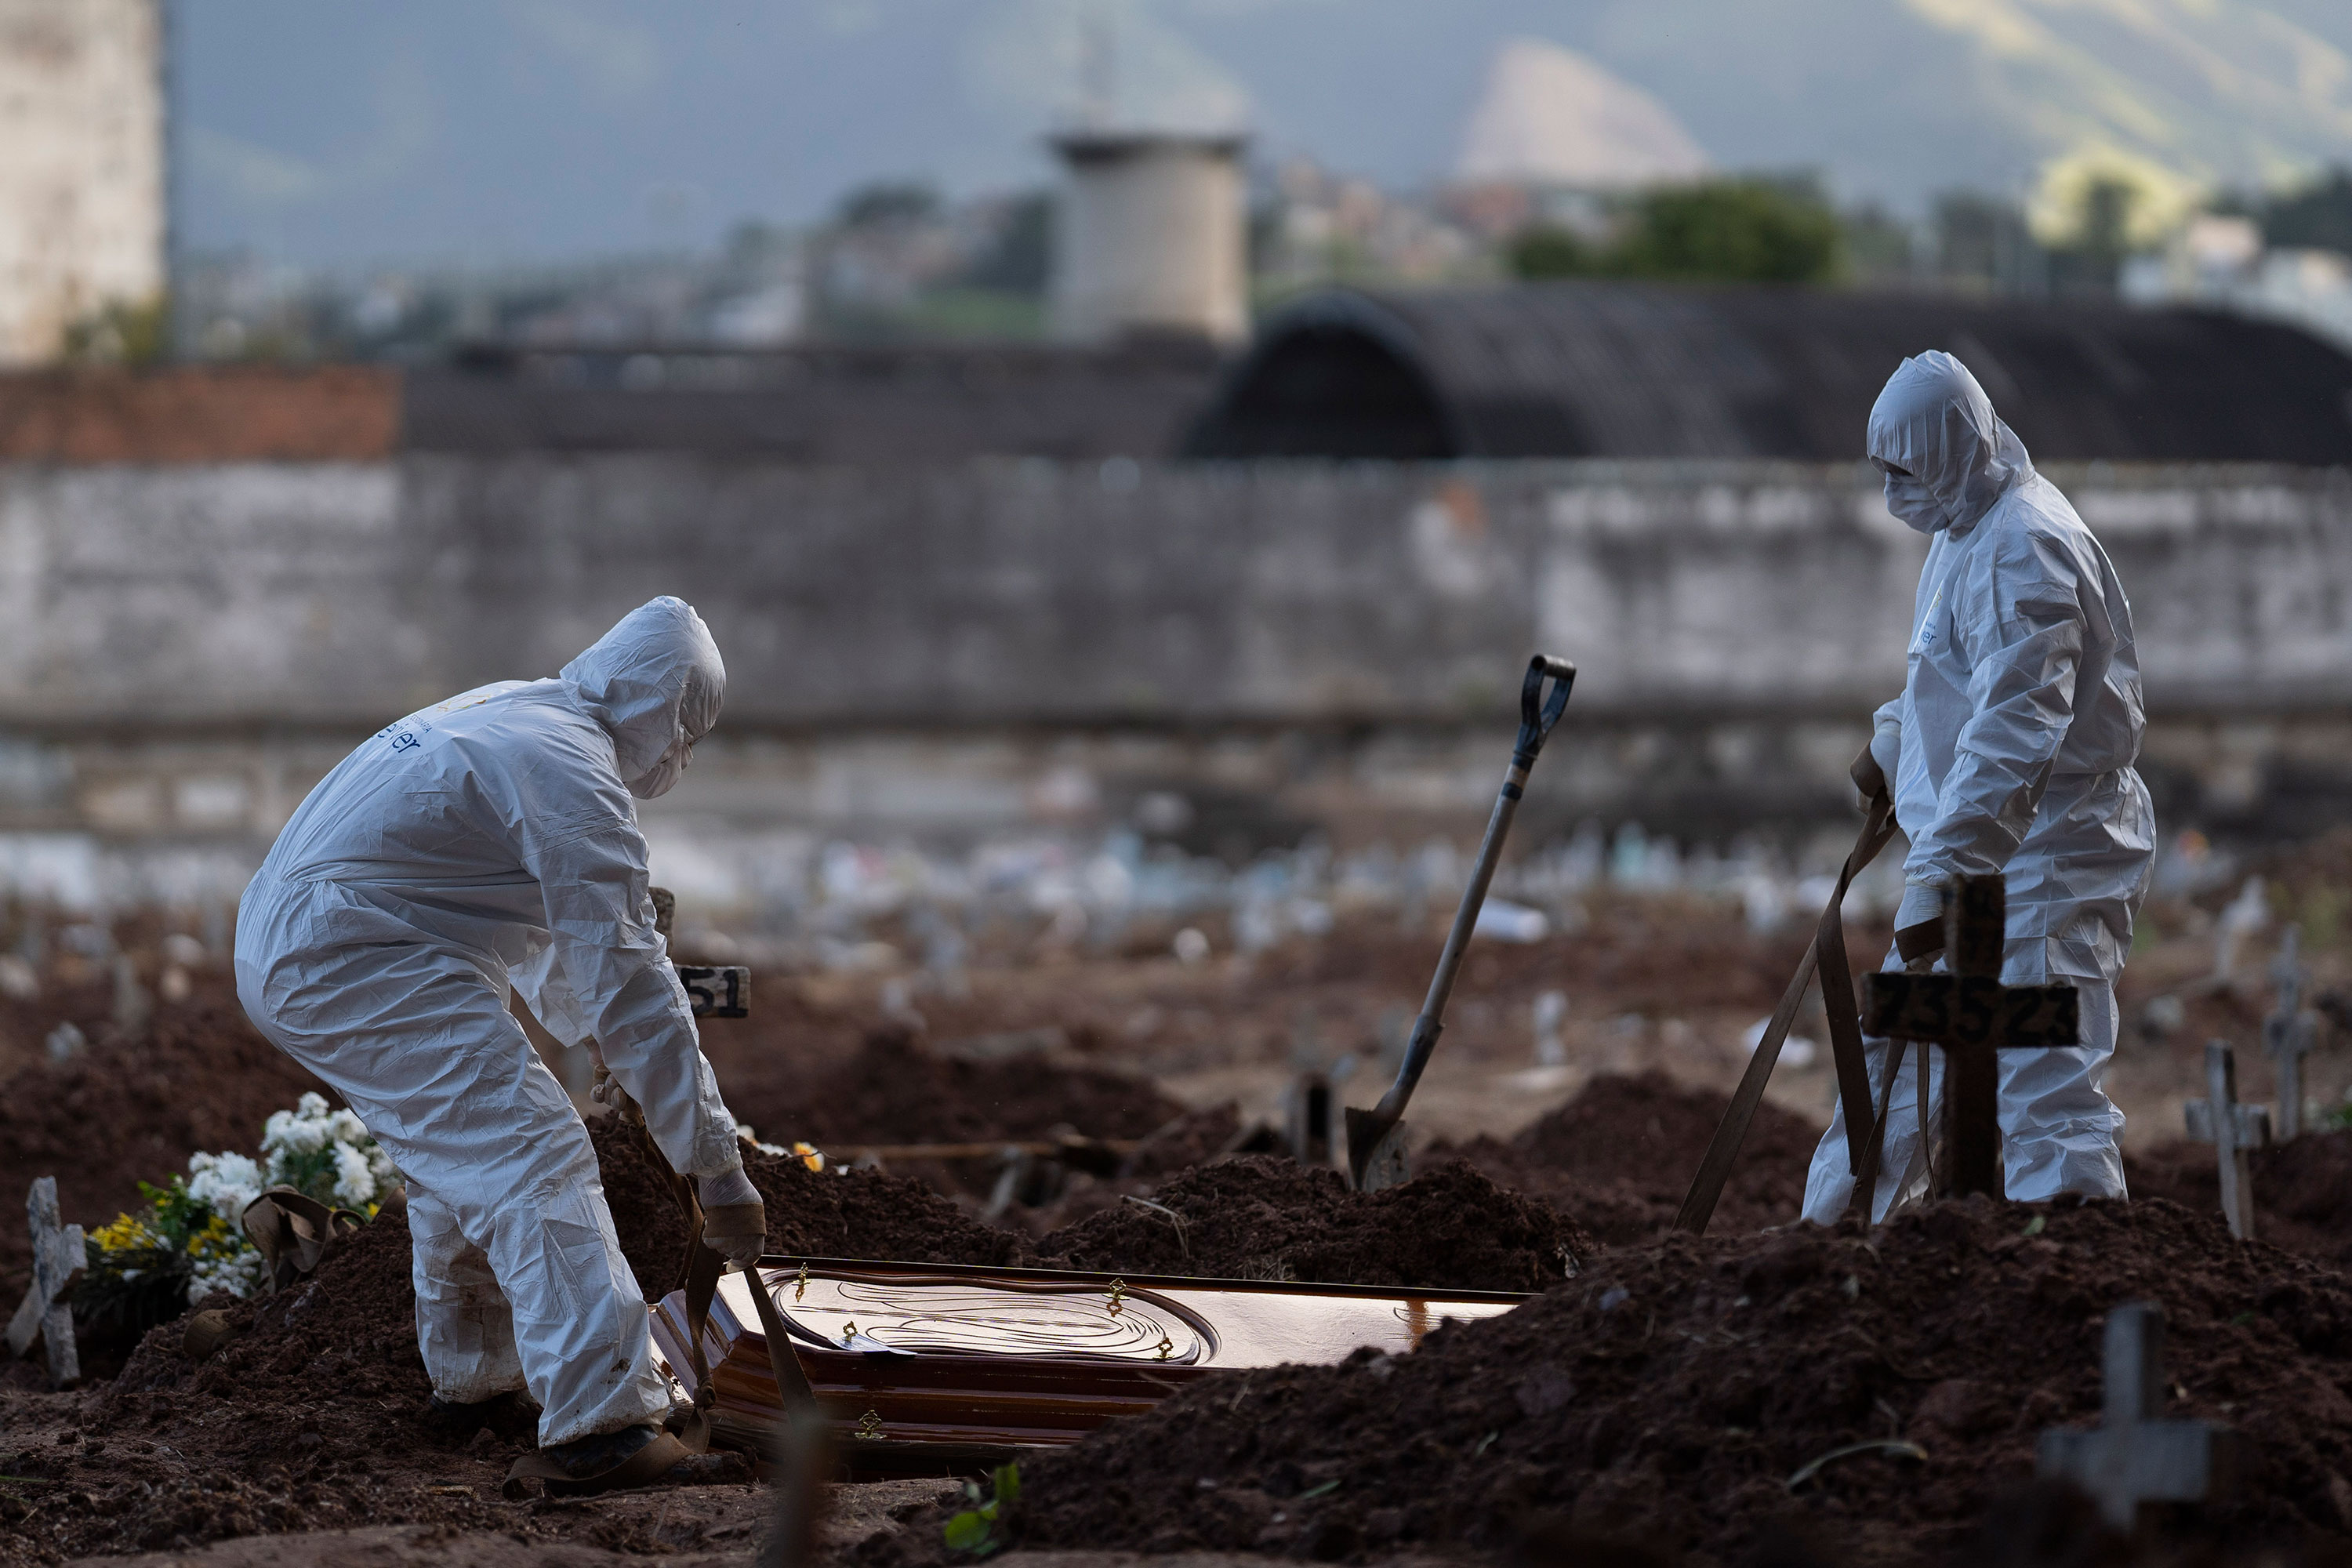 Cemetery workers wearing hazmat suits bury the coffin of a c in Rio de Janeiro, Brazil, Friday, May 8.